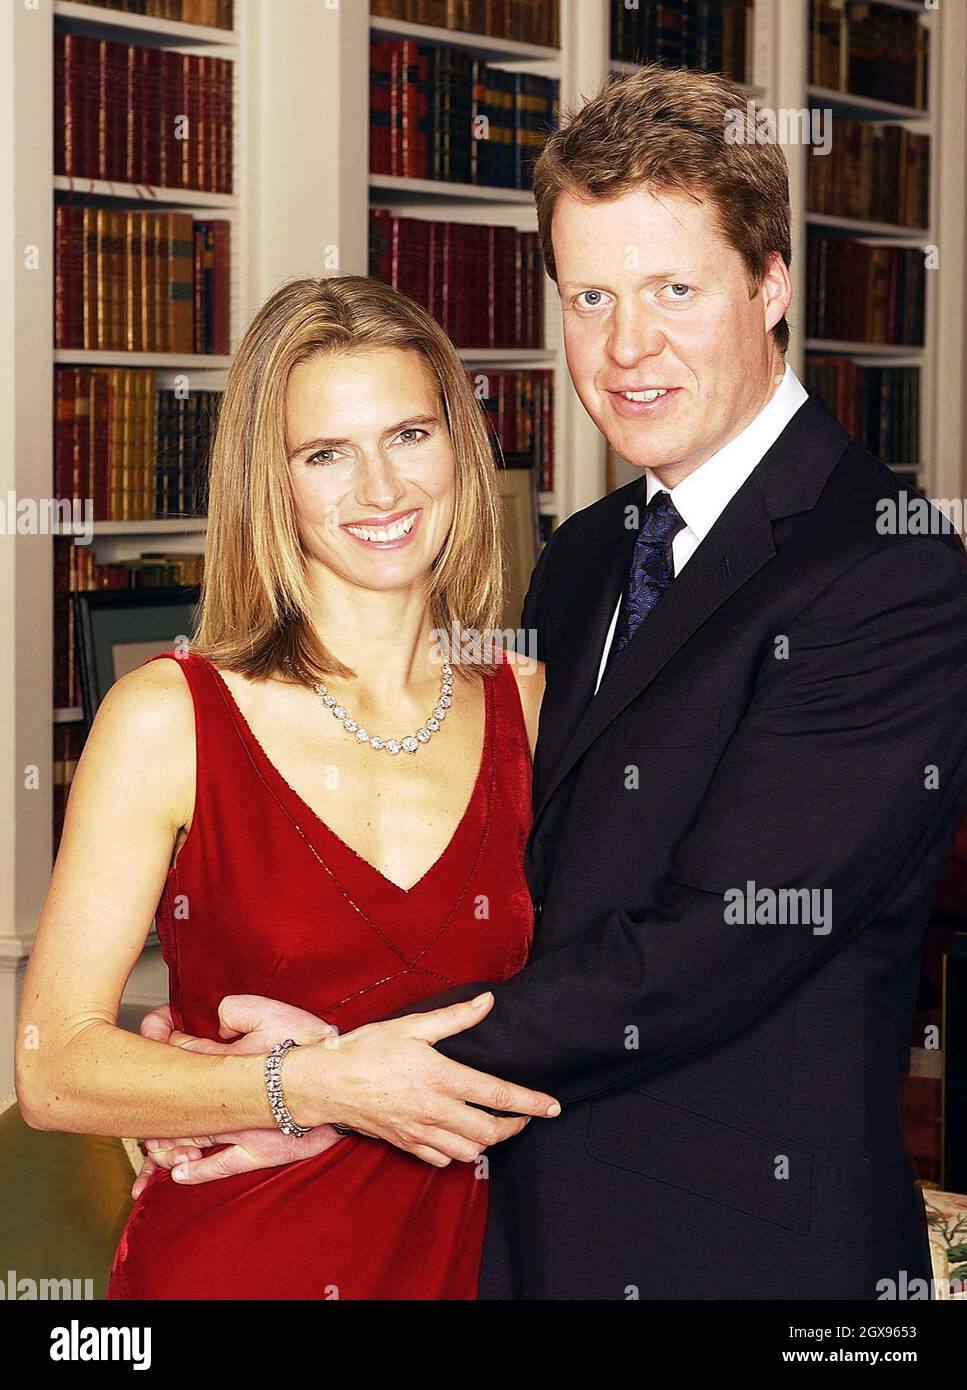 Earl Spencer and Caroline Freud at their marriage at Althorp.  A civil ceremony at four o'clock was followed by a blessing at 7 o'clock in the family chapel within the House. The wedding was attended by eighty close family and friends as well the couples' six children. Â©Anwar Hussein/allactiondigital.com  Stock Photo